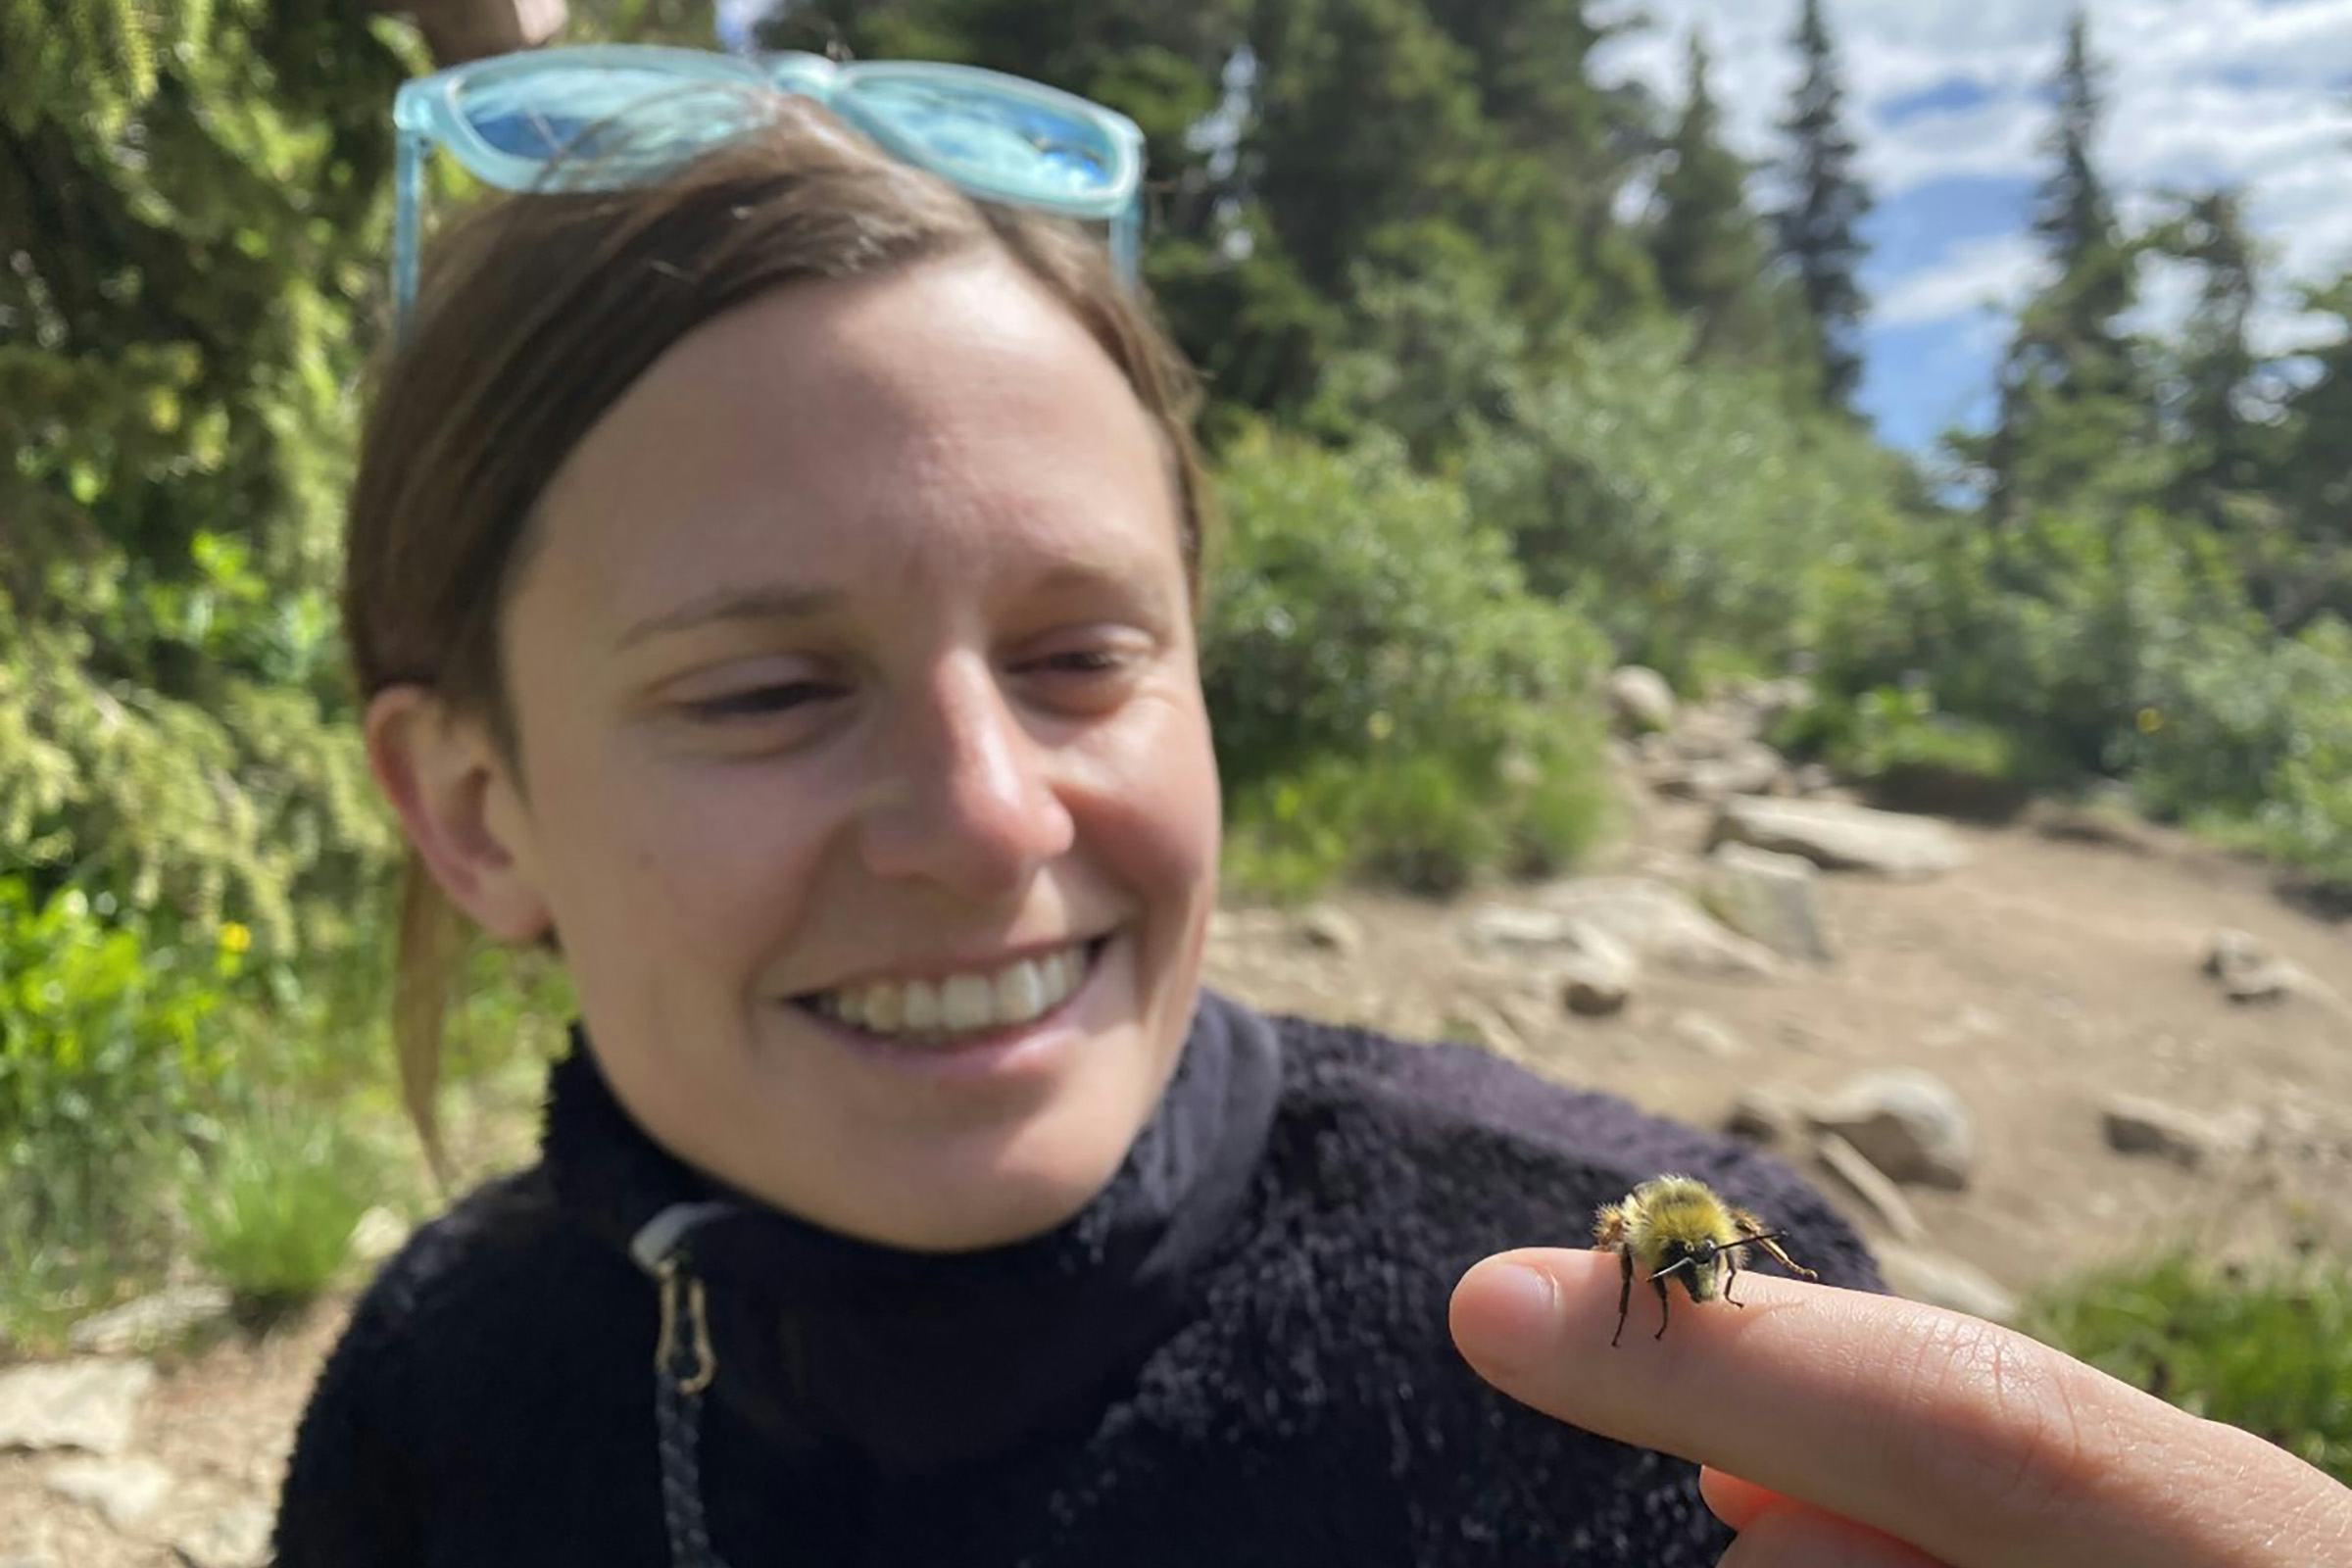 A woman looks at a bee on her finger